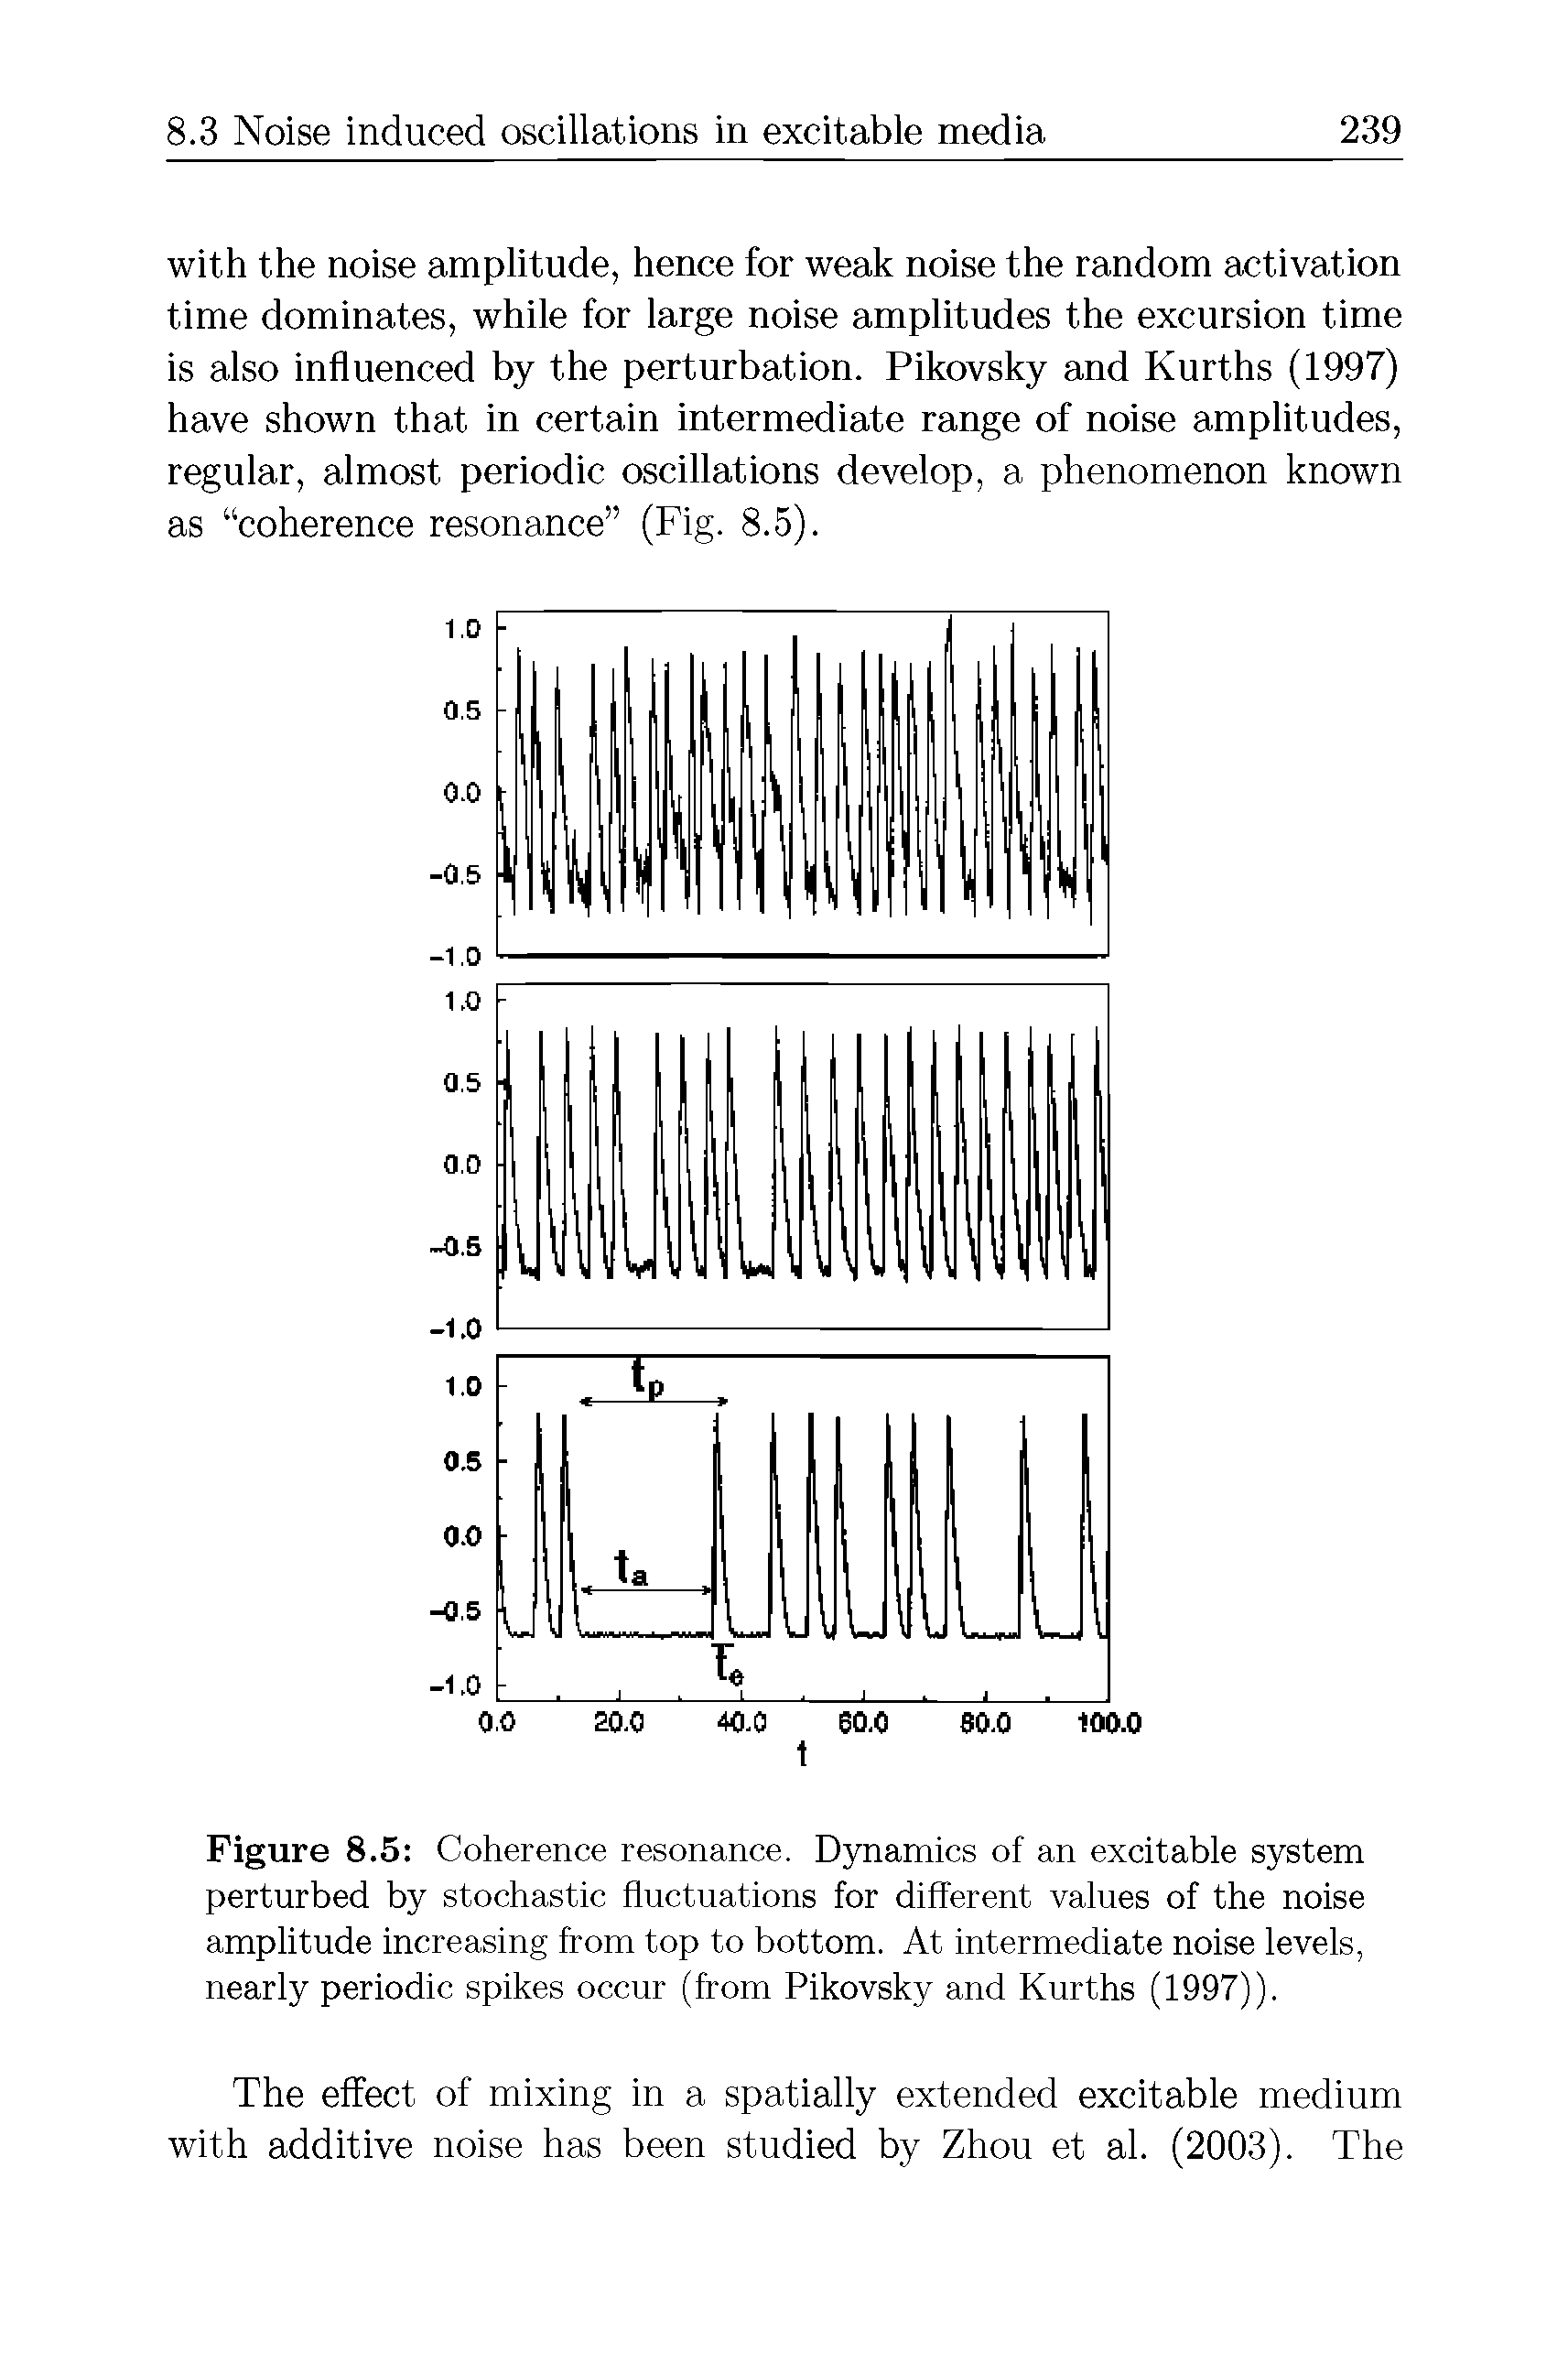 Figure 8.5 Coherence resonance. Dynamics of an excitable system perturbed by stochastic fluctuations for different values of the noise amplitude increasing from top to bottom. At intermediate noise levels, nearly periodic spikes occur (from Pikovsky and Kurths (1997)).